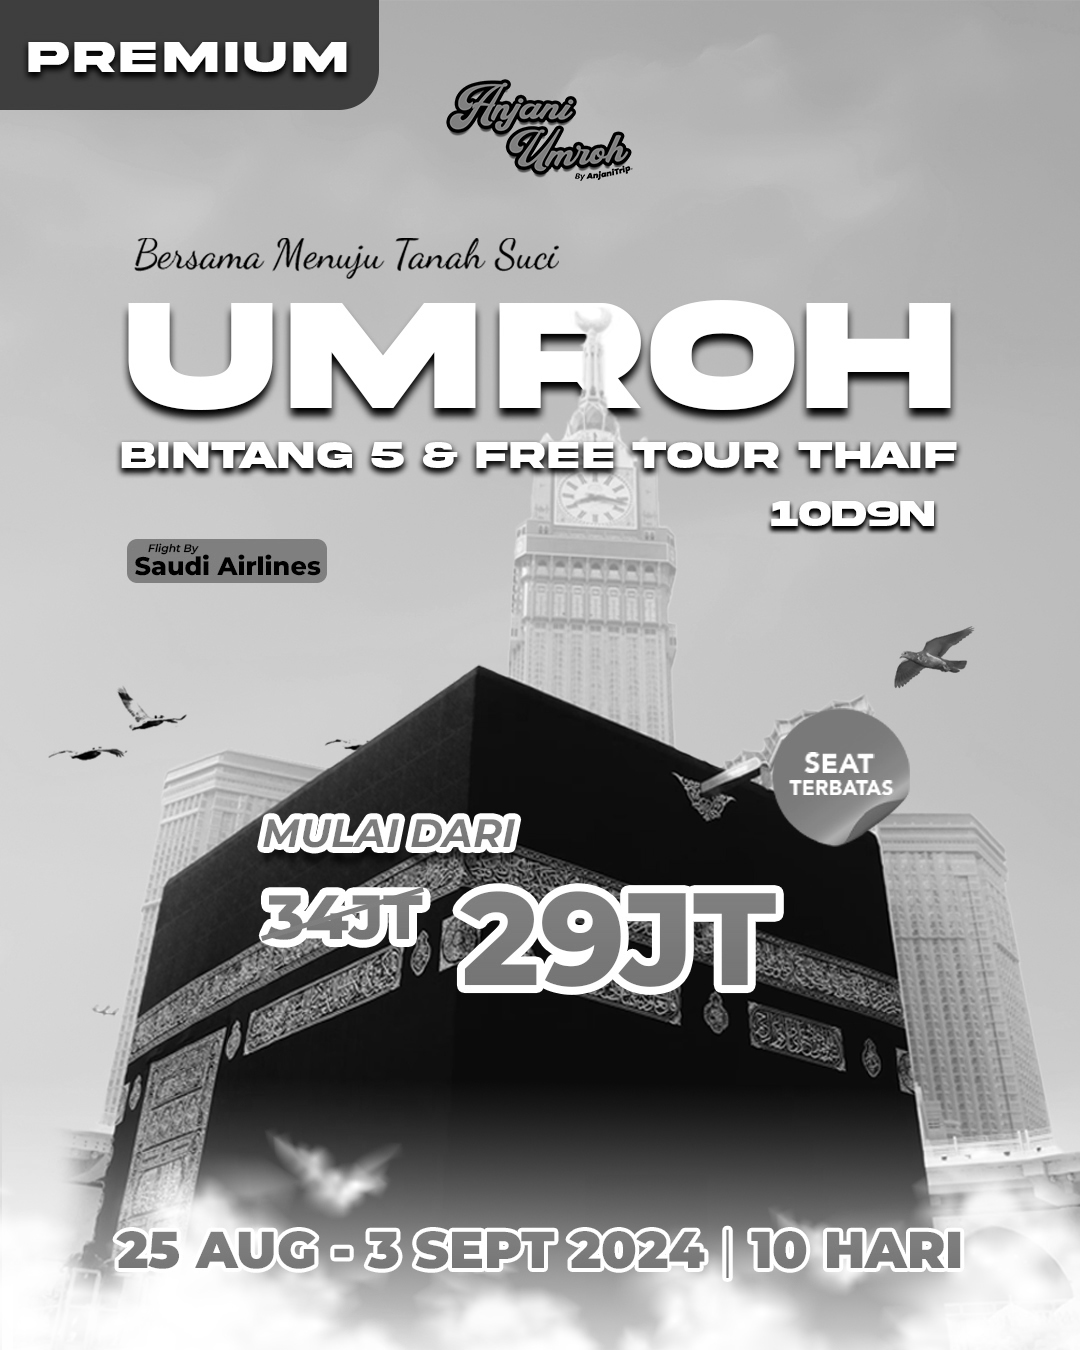 Umroh Bintang 5 & Free City Tour Thaif | 25 Aug – 3 Sep Flight By Saudi Airlines